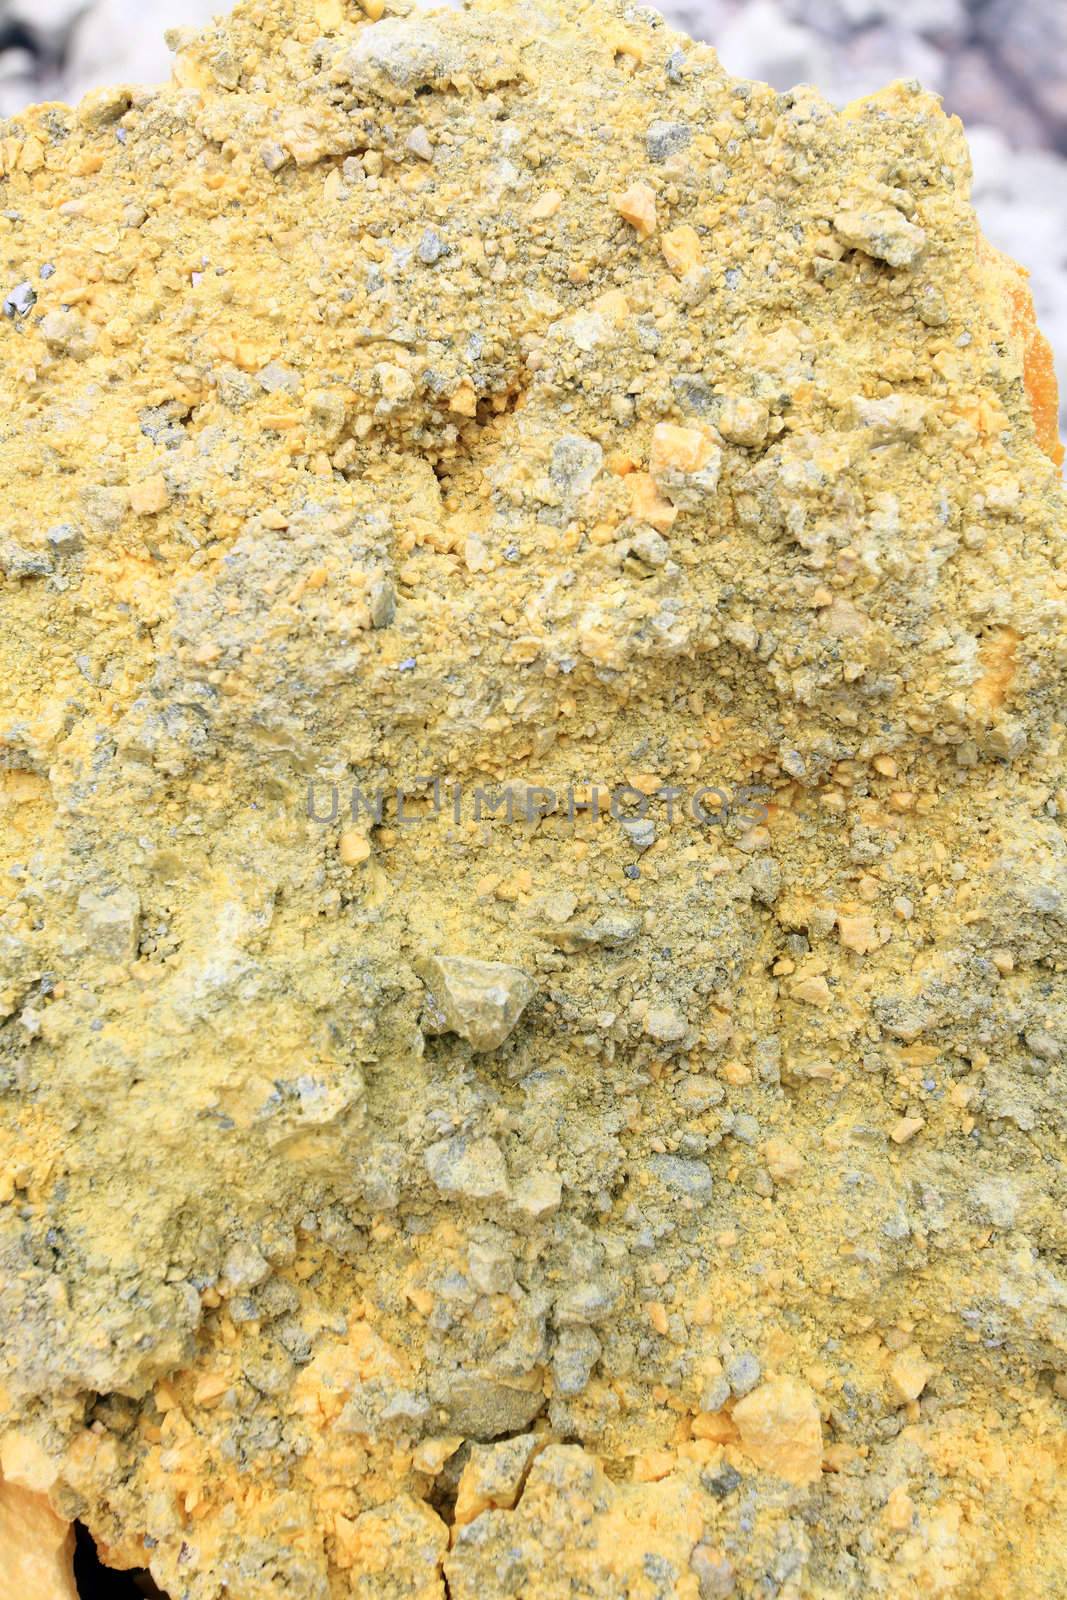 Sulfur Texture from Geology Volcanic Crater using as background